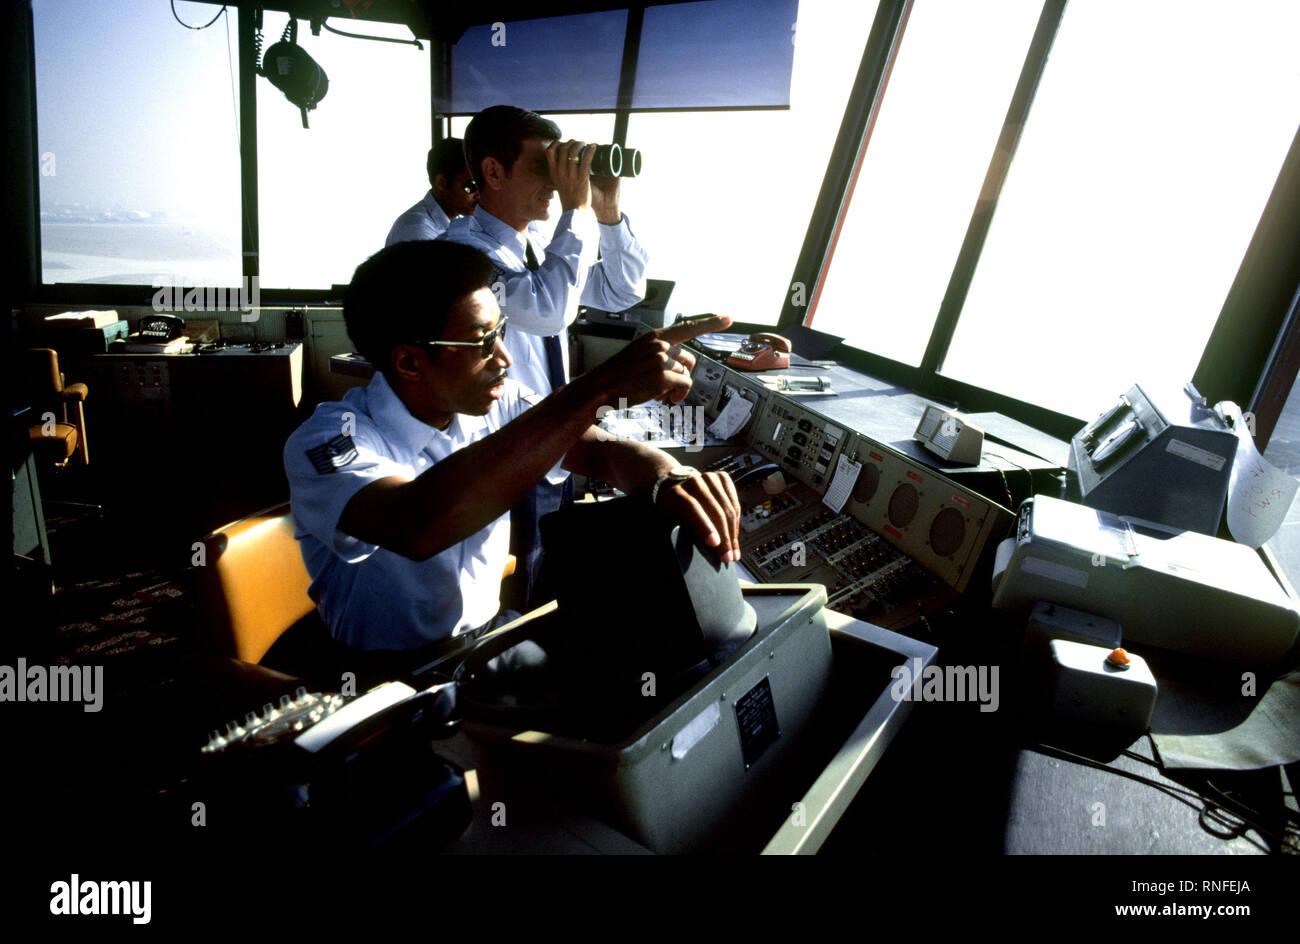 Air traffic controllers of the Air Force Communications Command (AFCC) in the control tower observe incoming and outgoing aircraft. Stock Photo